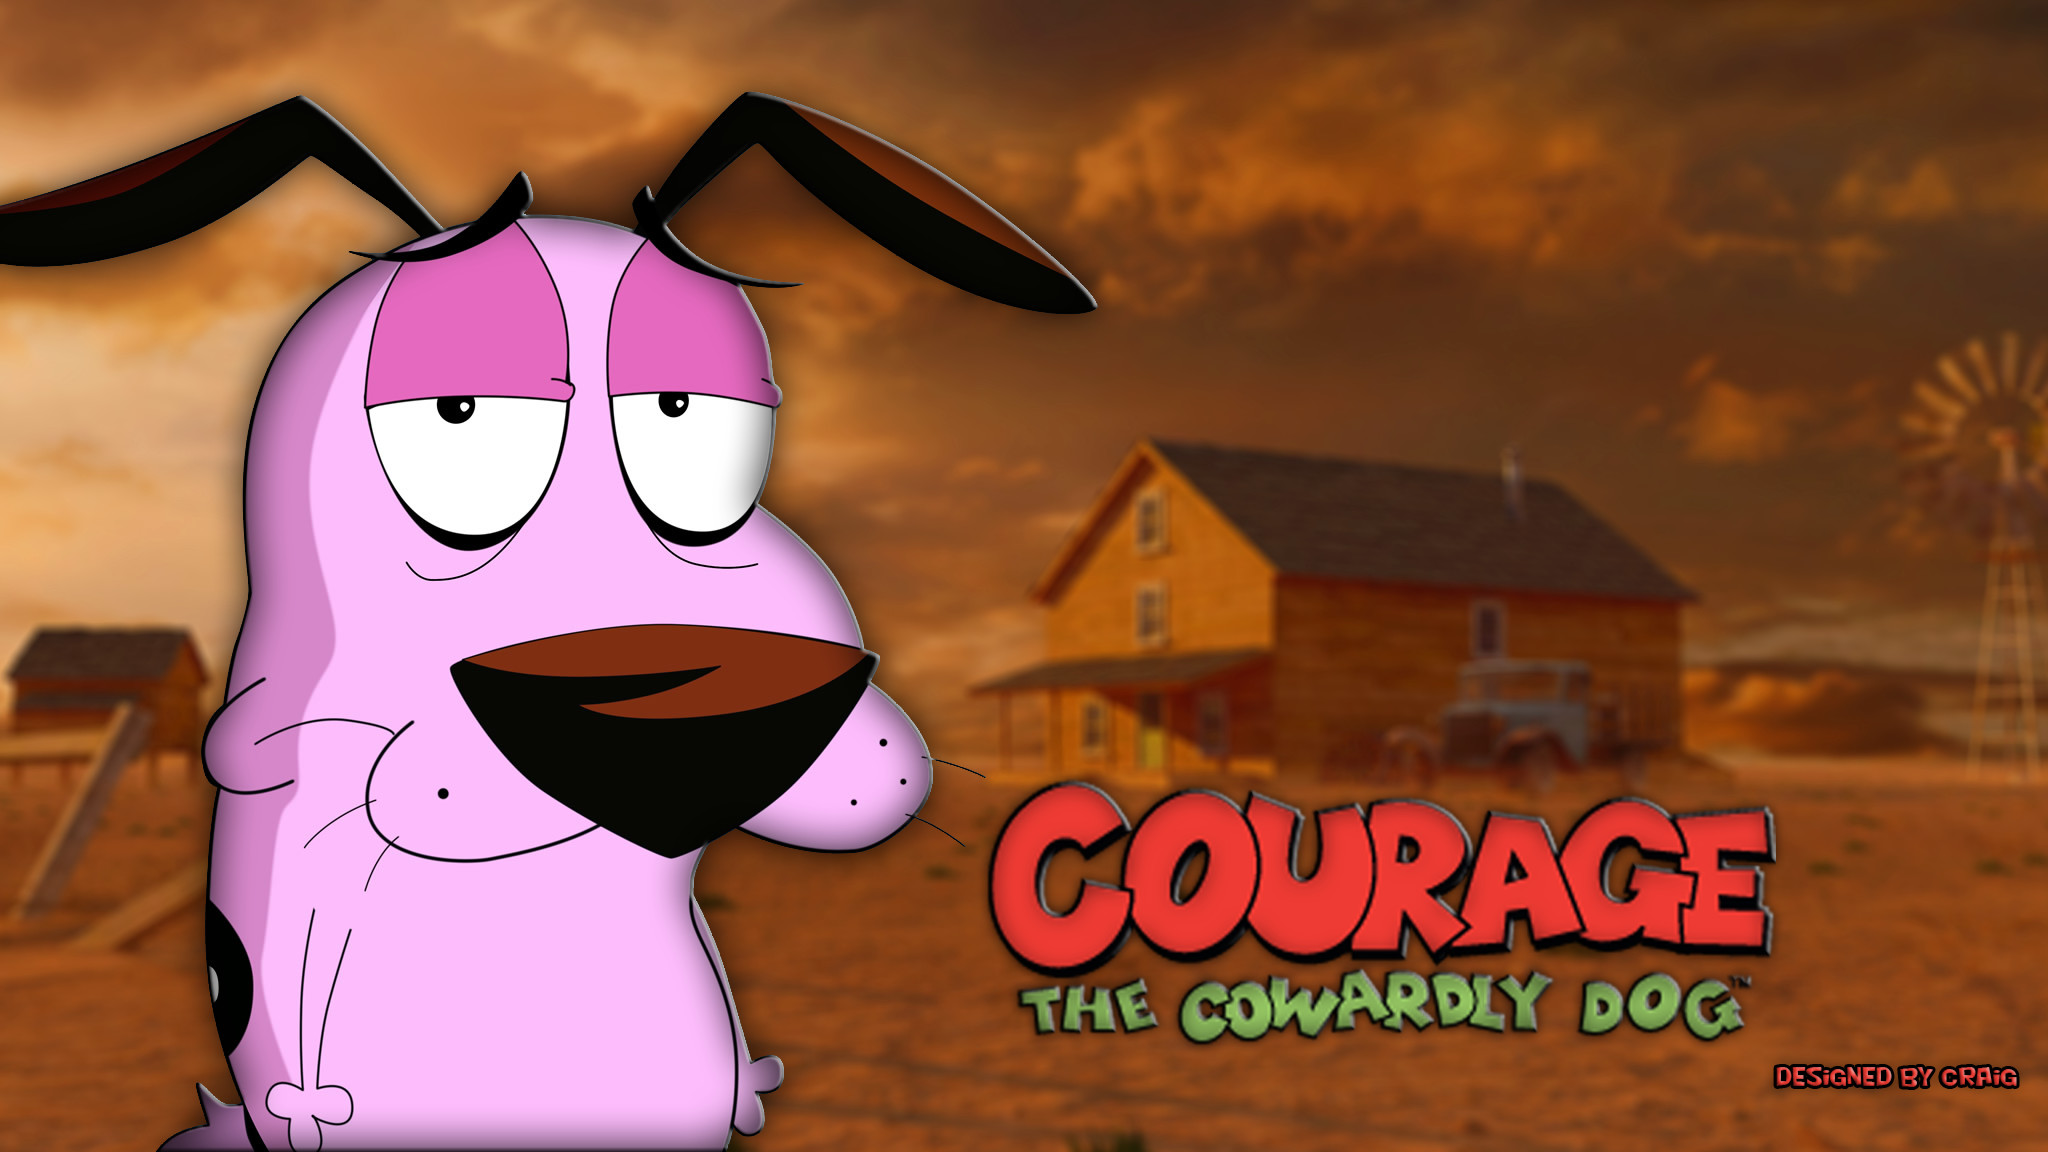 Courage the Cowardly Dog Wallpaper.